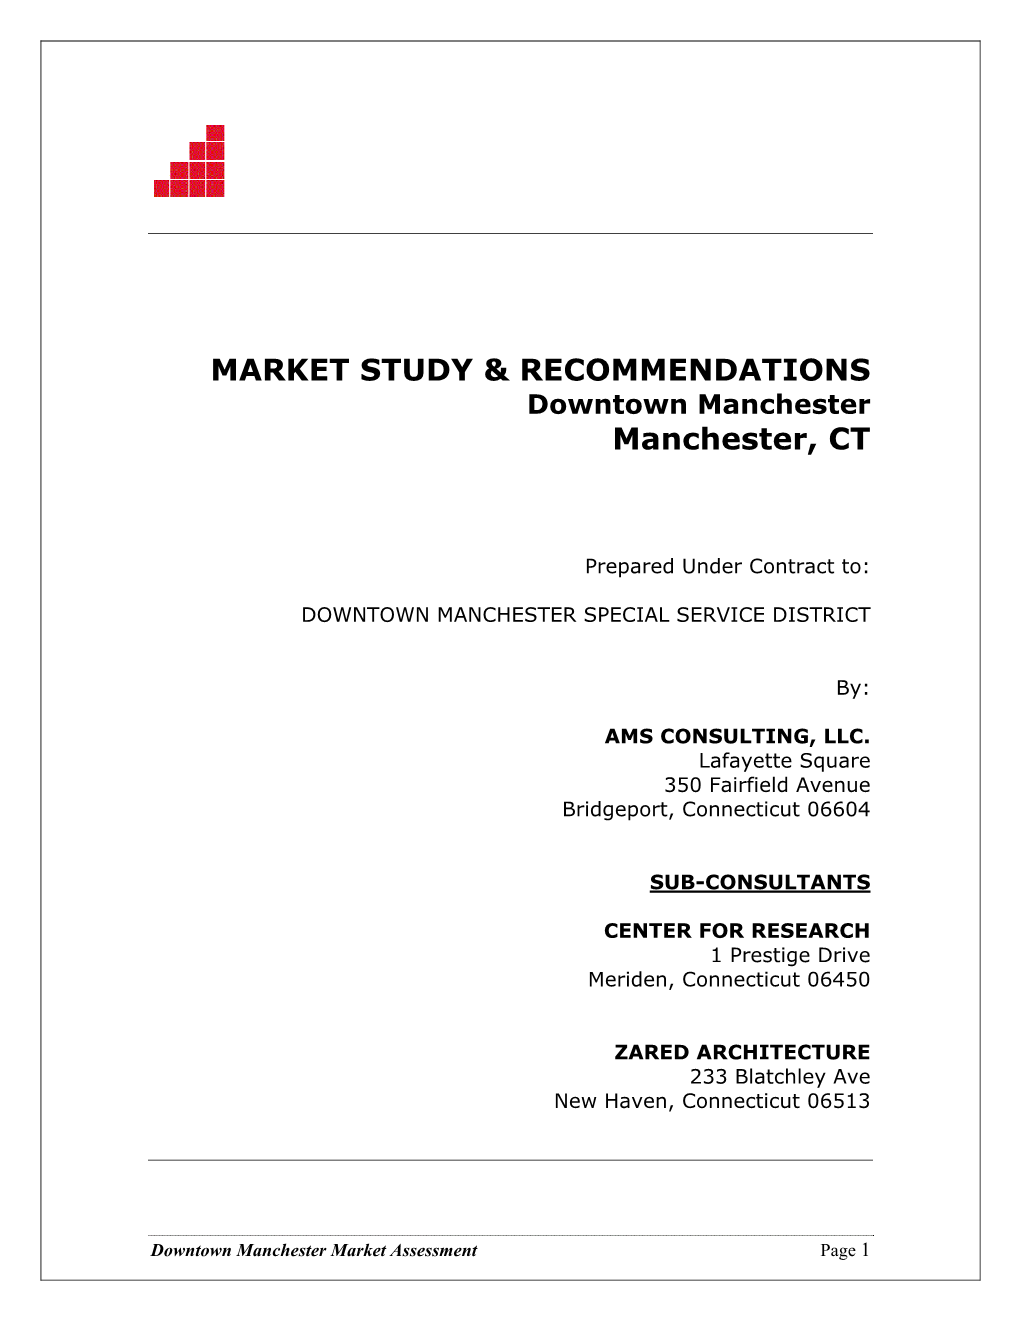 Downtown Manchester Market Study and Recommendations